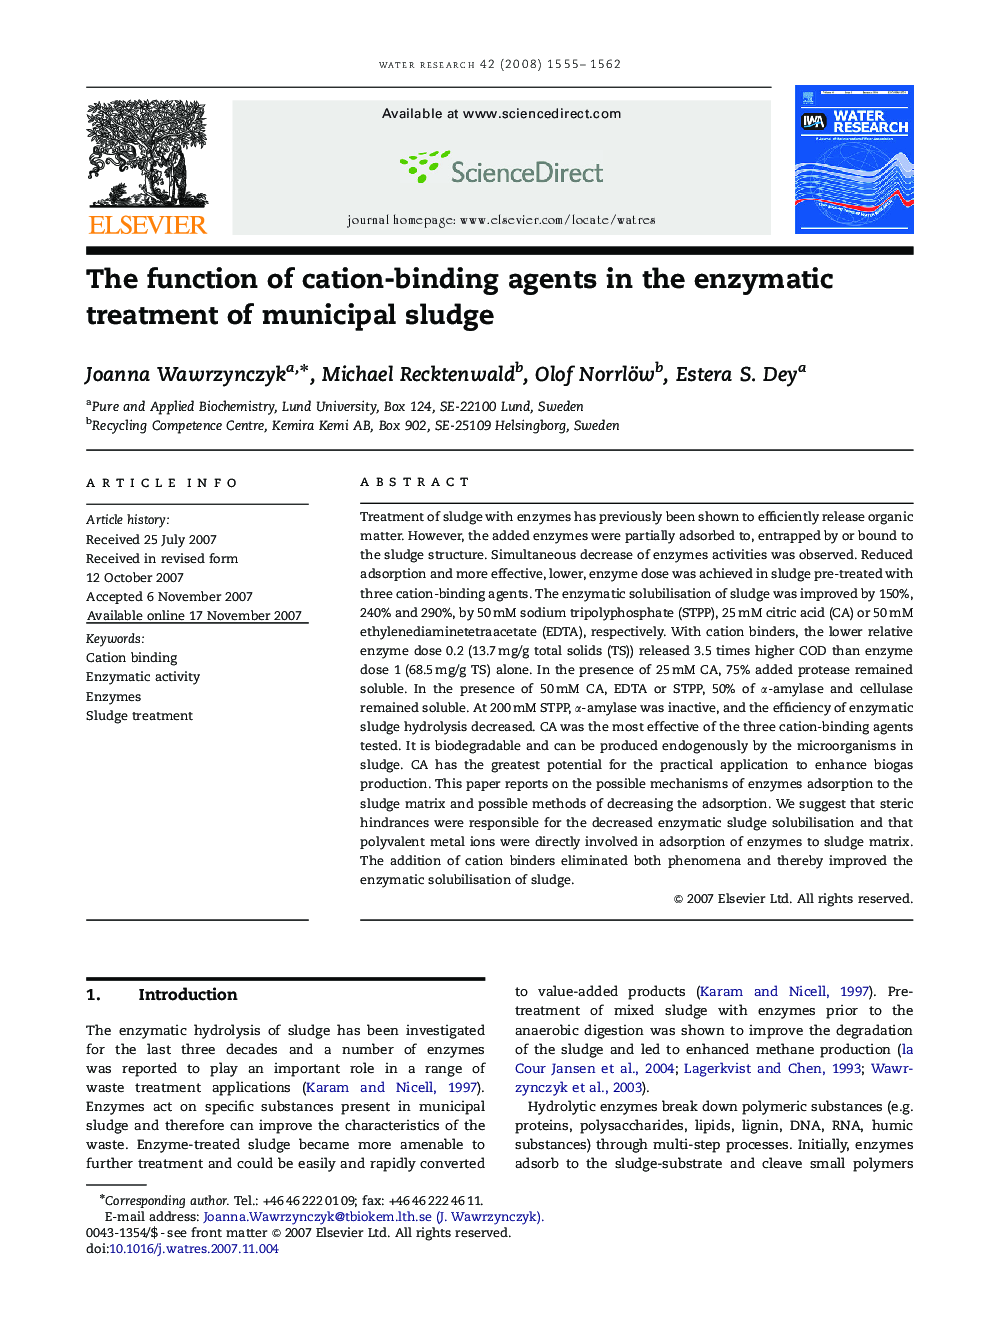 The function of cation-binding agents in the enzymatic treatment of municipal sludge